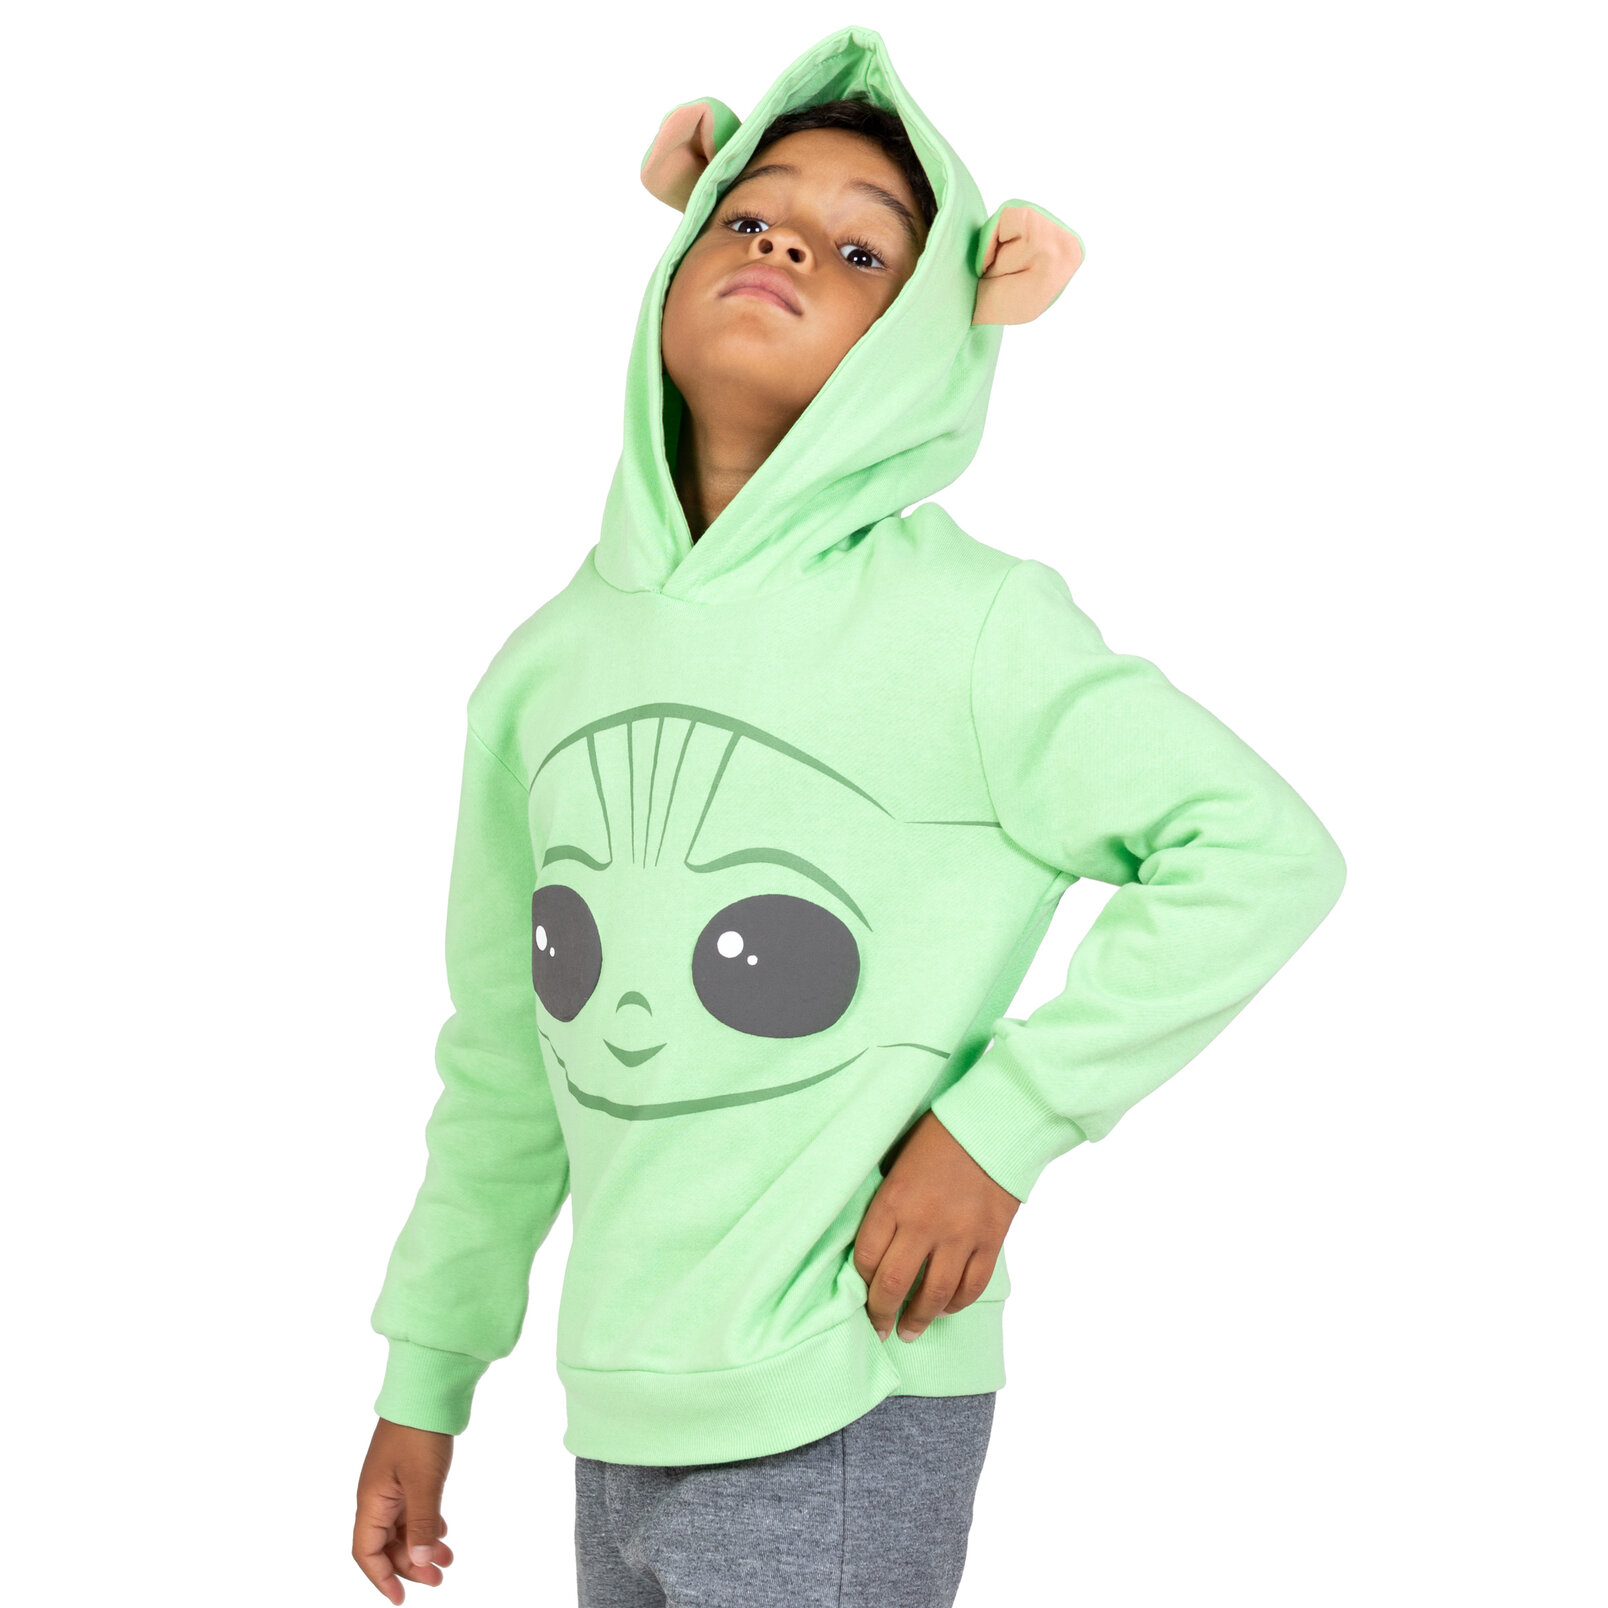 Star Wars Baby Yoda The Mandalorian Boy's Pullover Fleece Hoodie Fancy-Dress Costume for Toddler, 4T - image 5 of 5